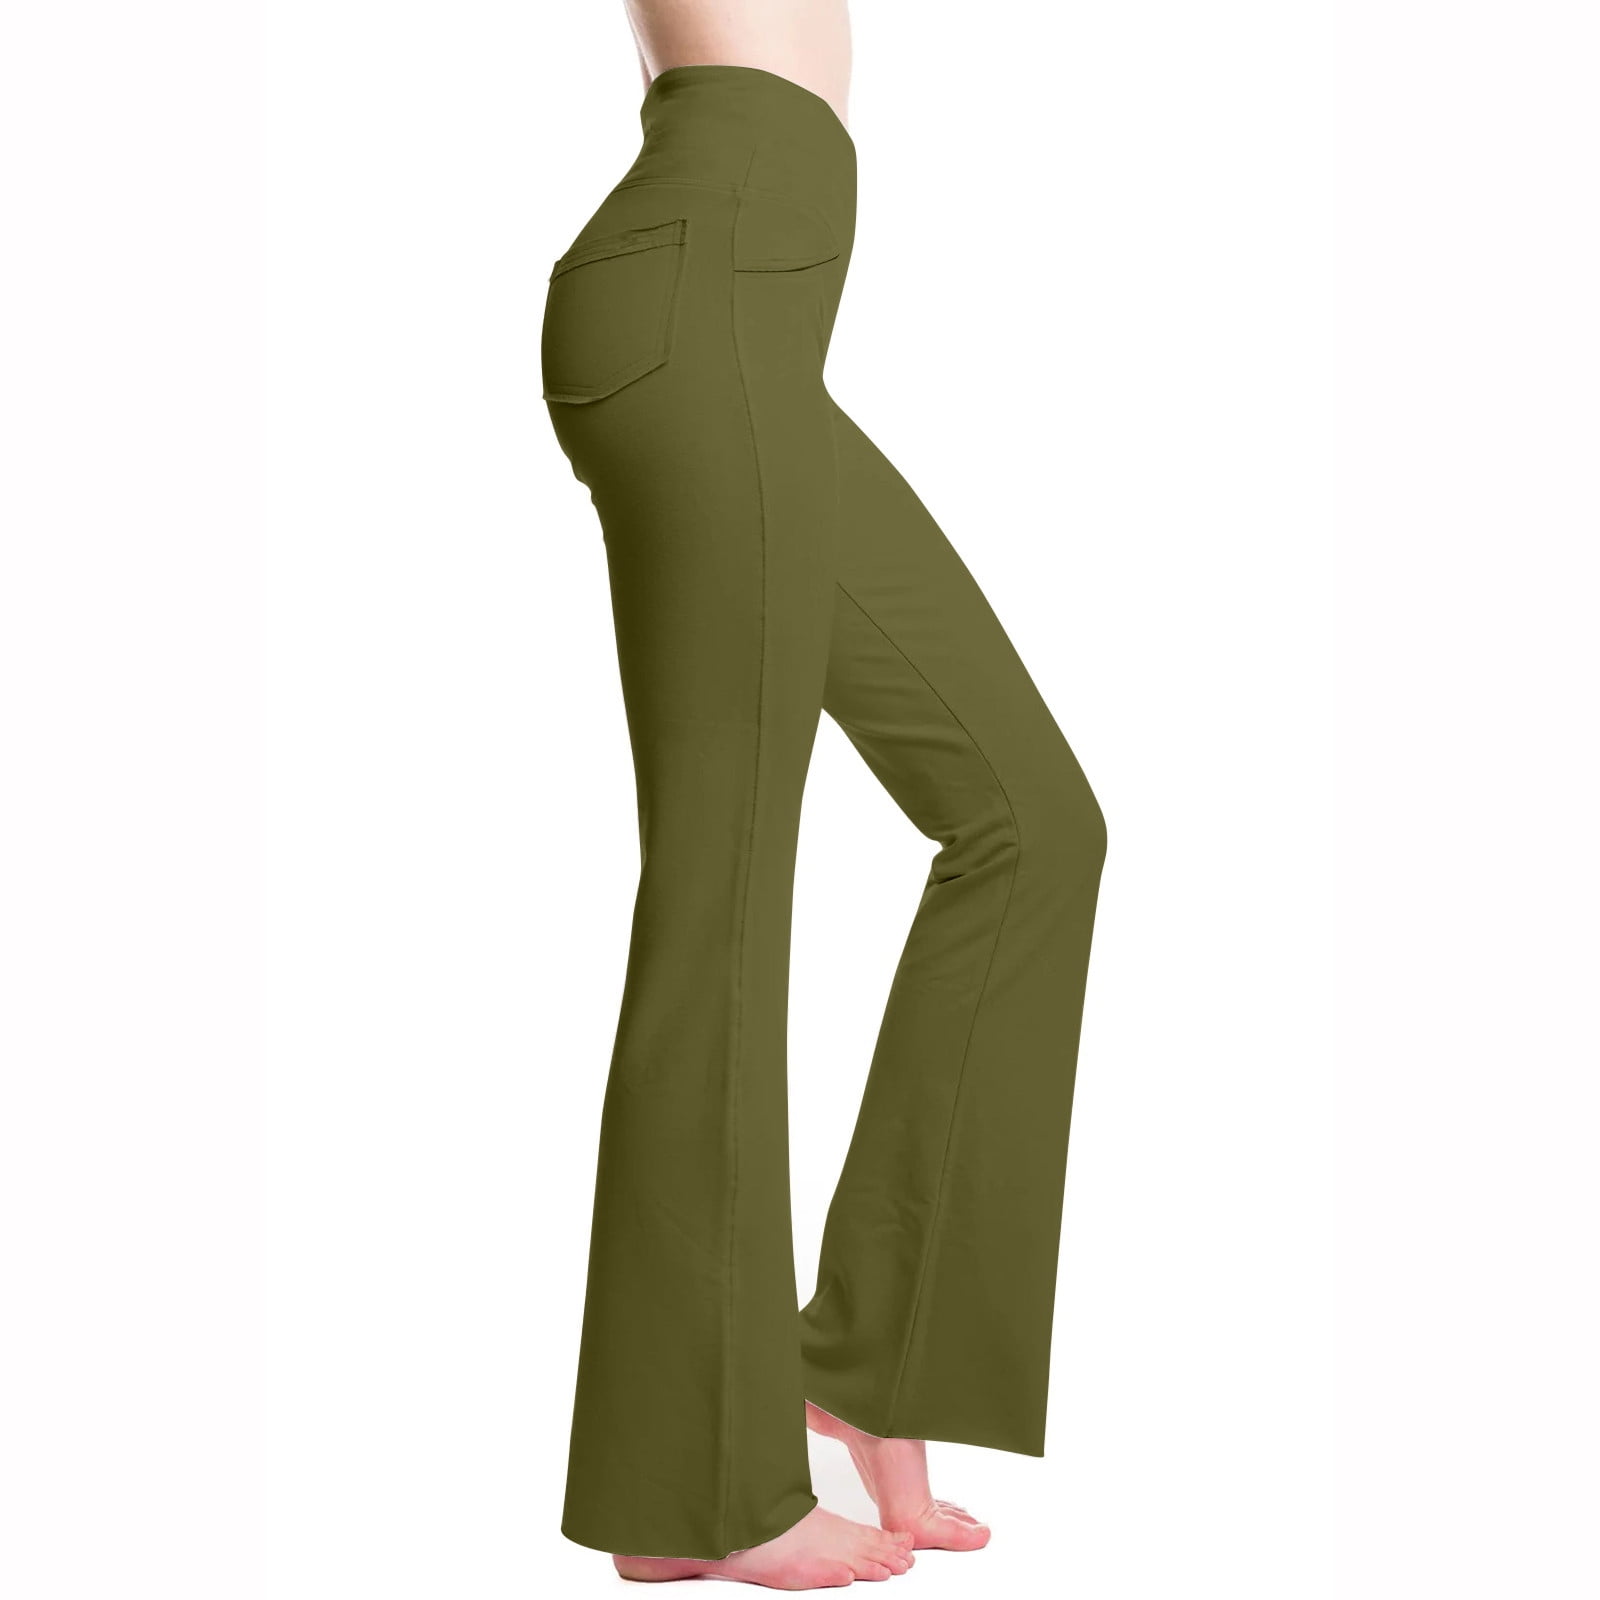  HDE Yoga Dress Pants for Women Straight Leg Pull On Pants with  8 Pockets Khaki - S : Clothing, Shoes & Jewelry